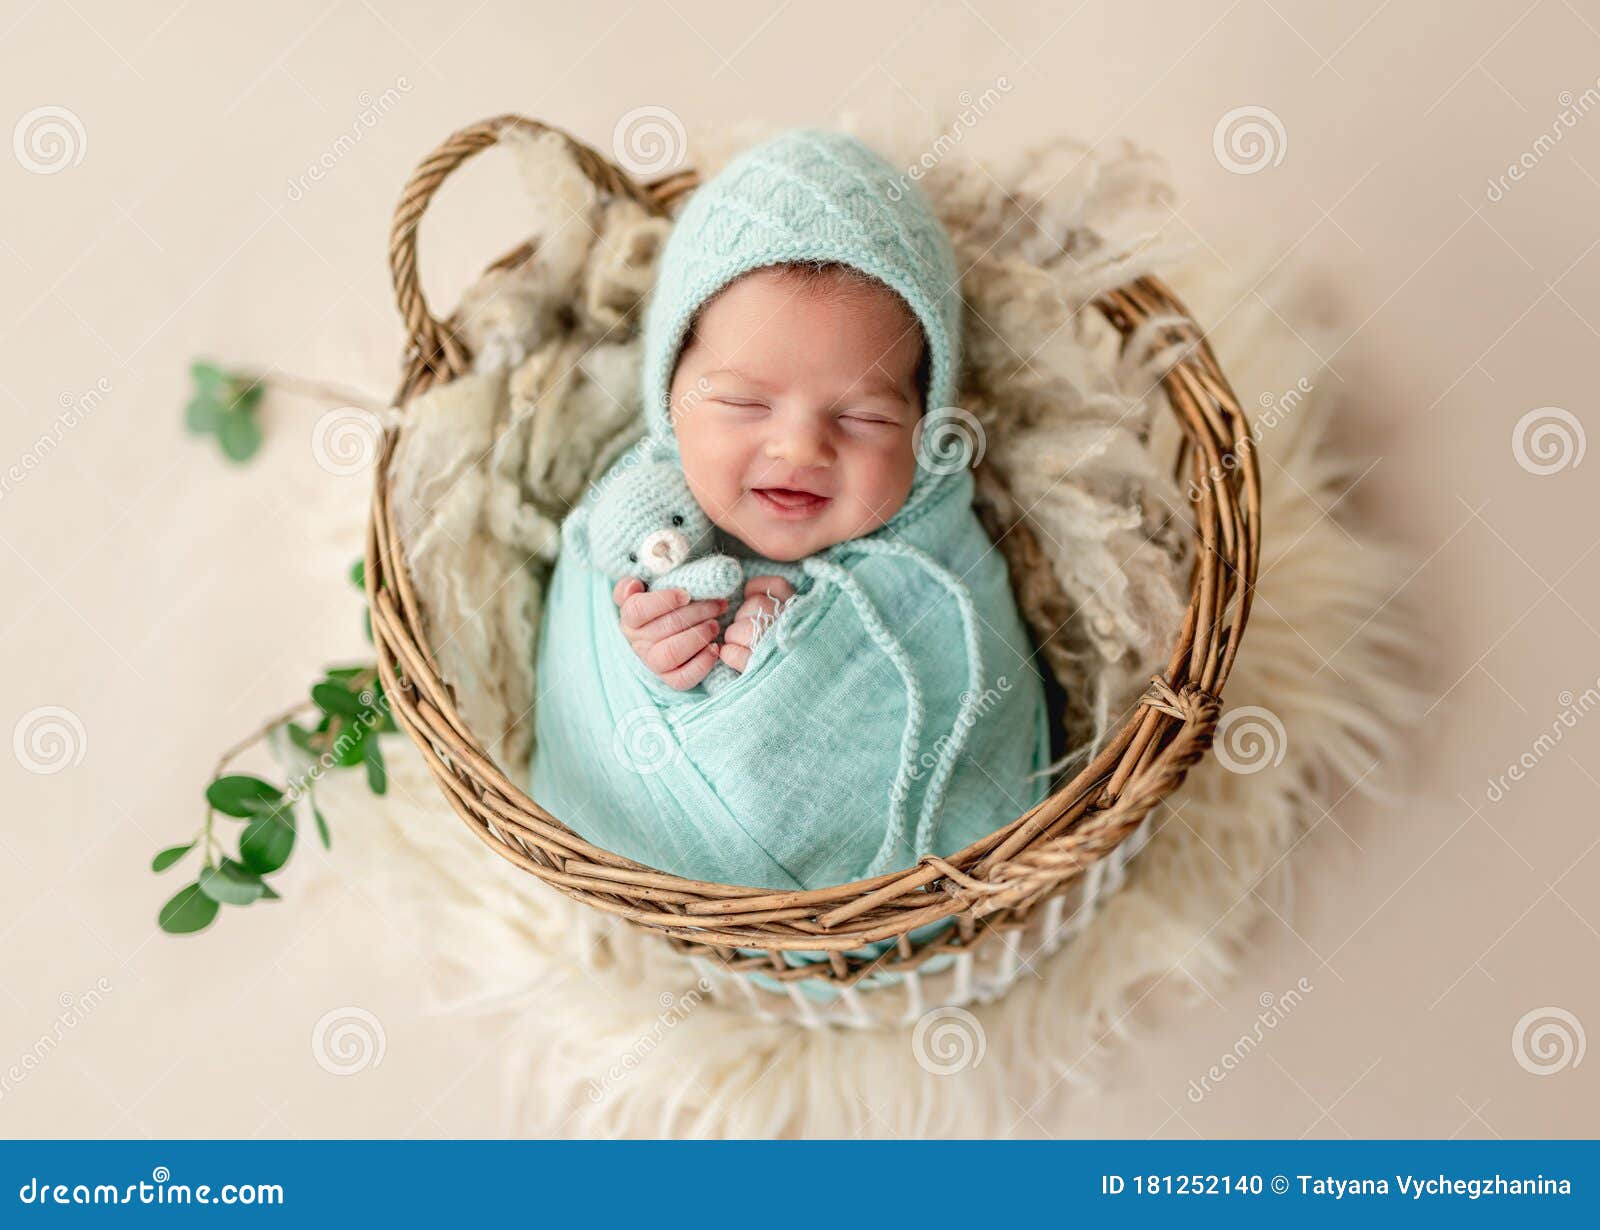 Funny Newborn Smiling in Dream Stock Photo - Image of baby, pose: 181252140